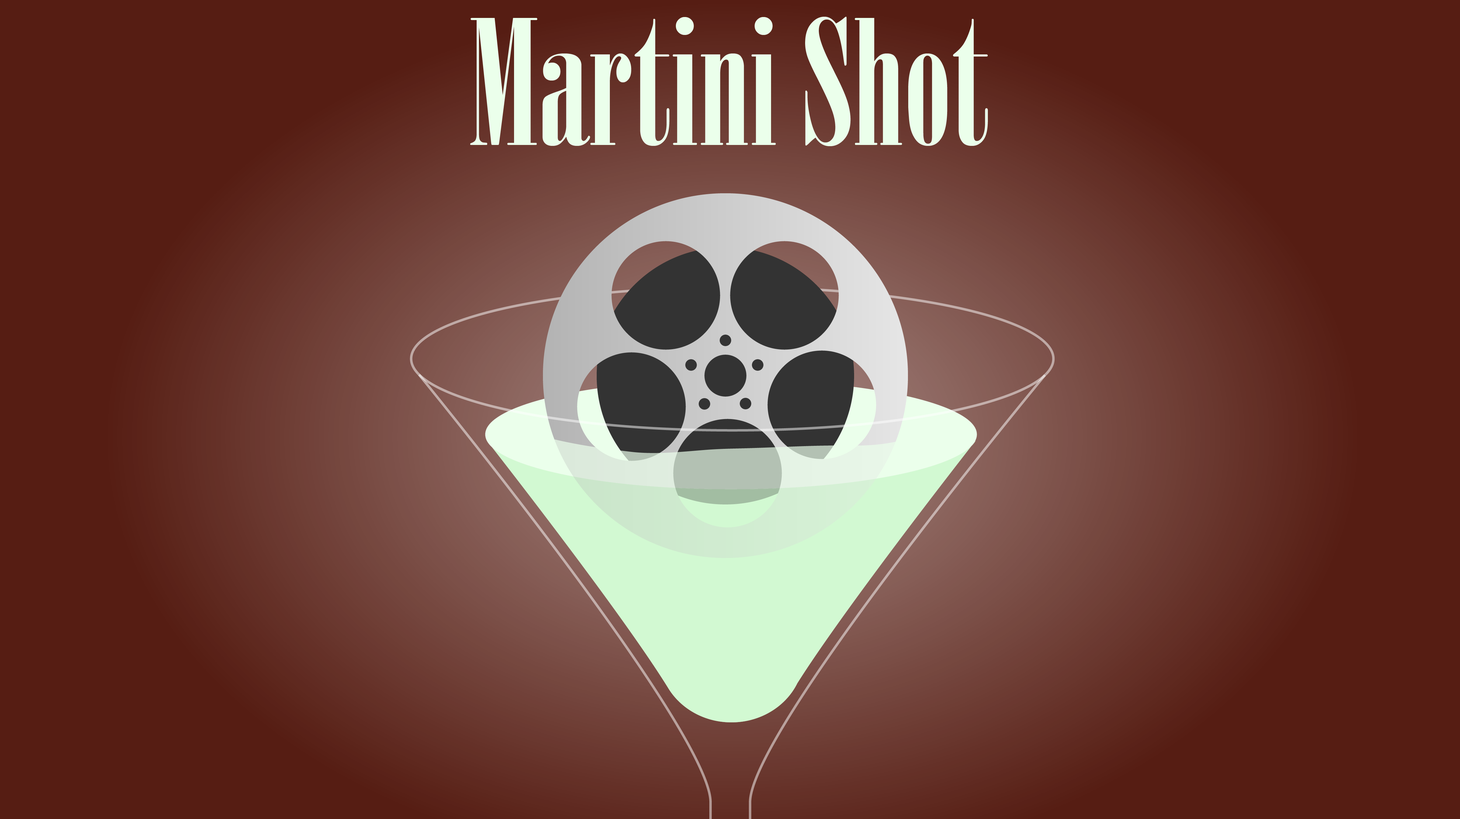 This is Rob Long and on today’s Martini Shot I tell the story of the movie star, the eighty dollar plumber, and the joys of a normal life. It all ties together, I promise.